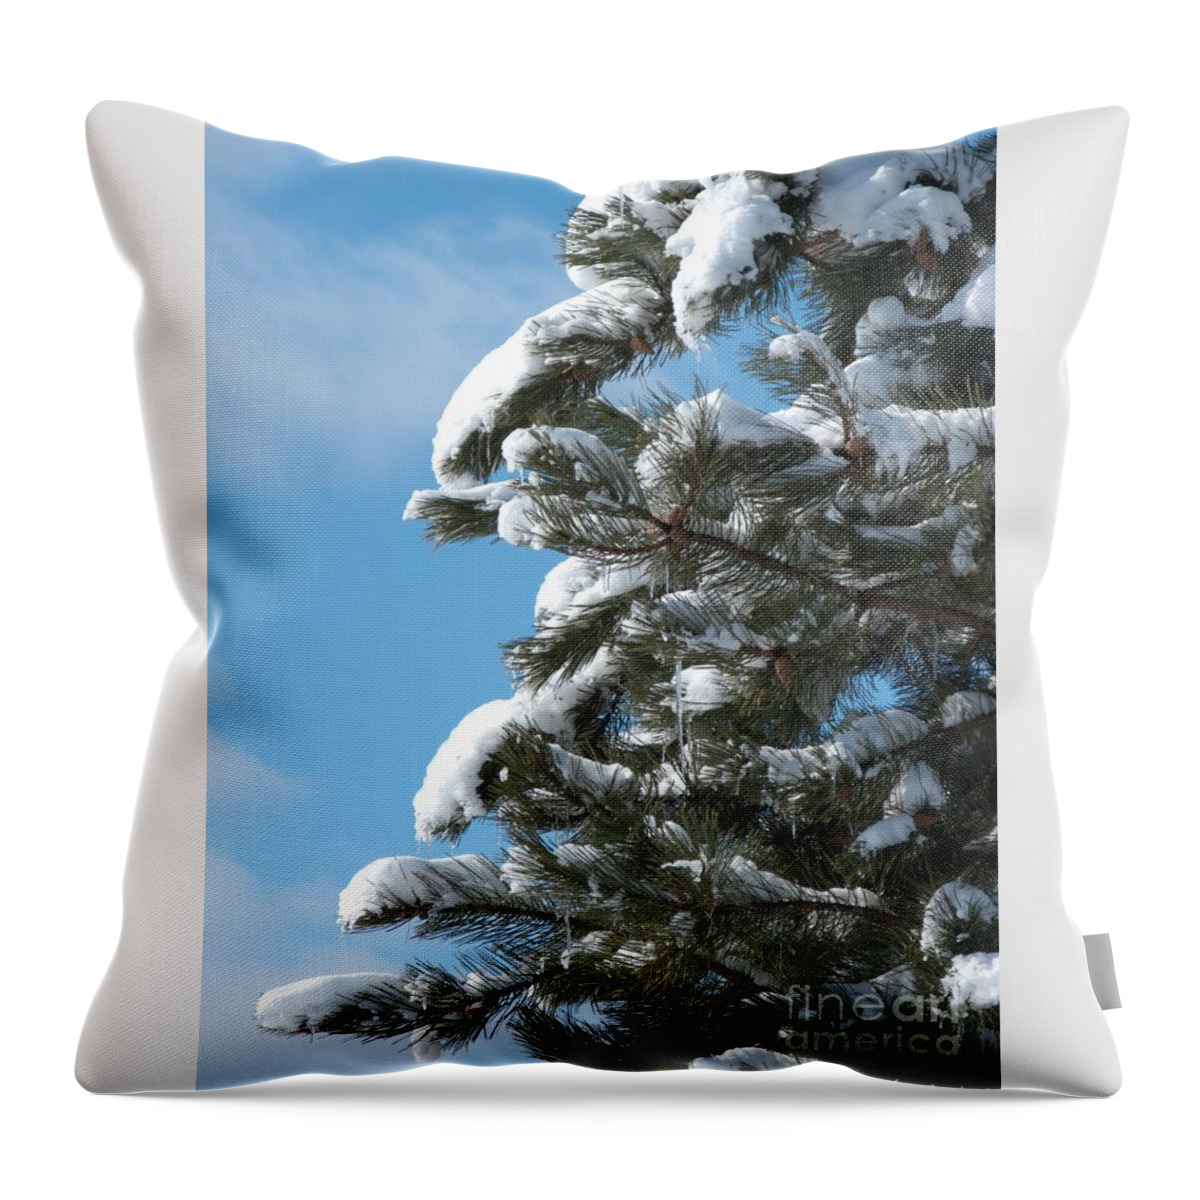 Snow Throw Pillow featuring the photograph Snow-Clad Pine by Ann Horn